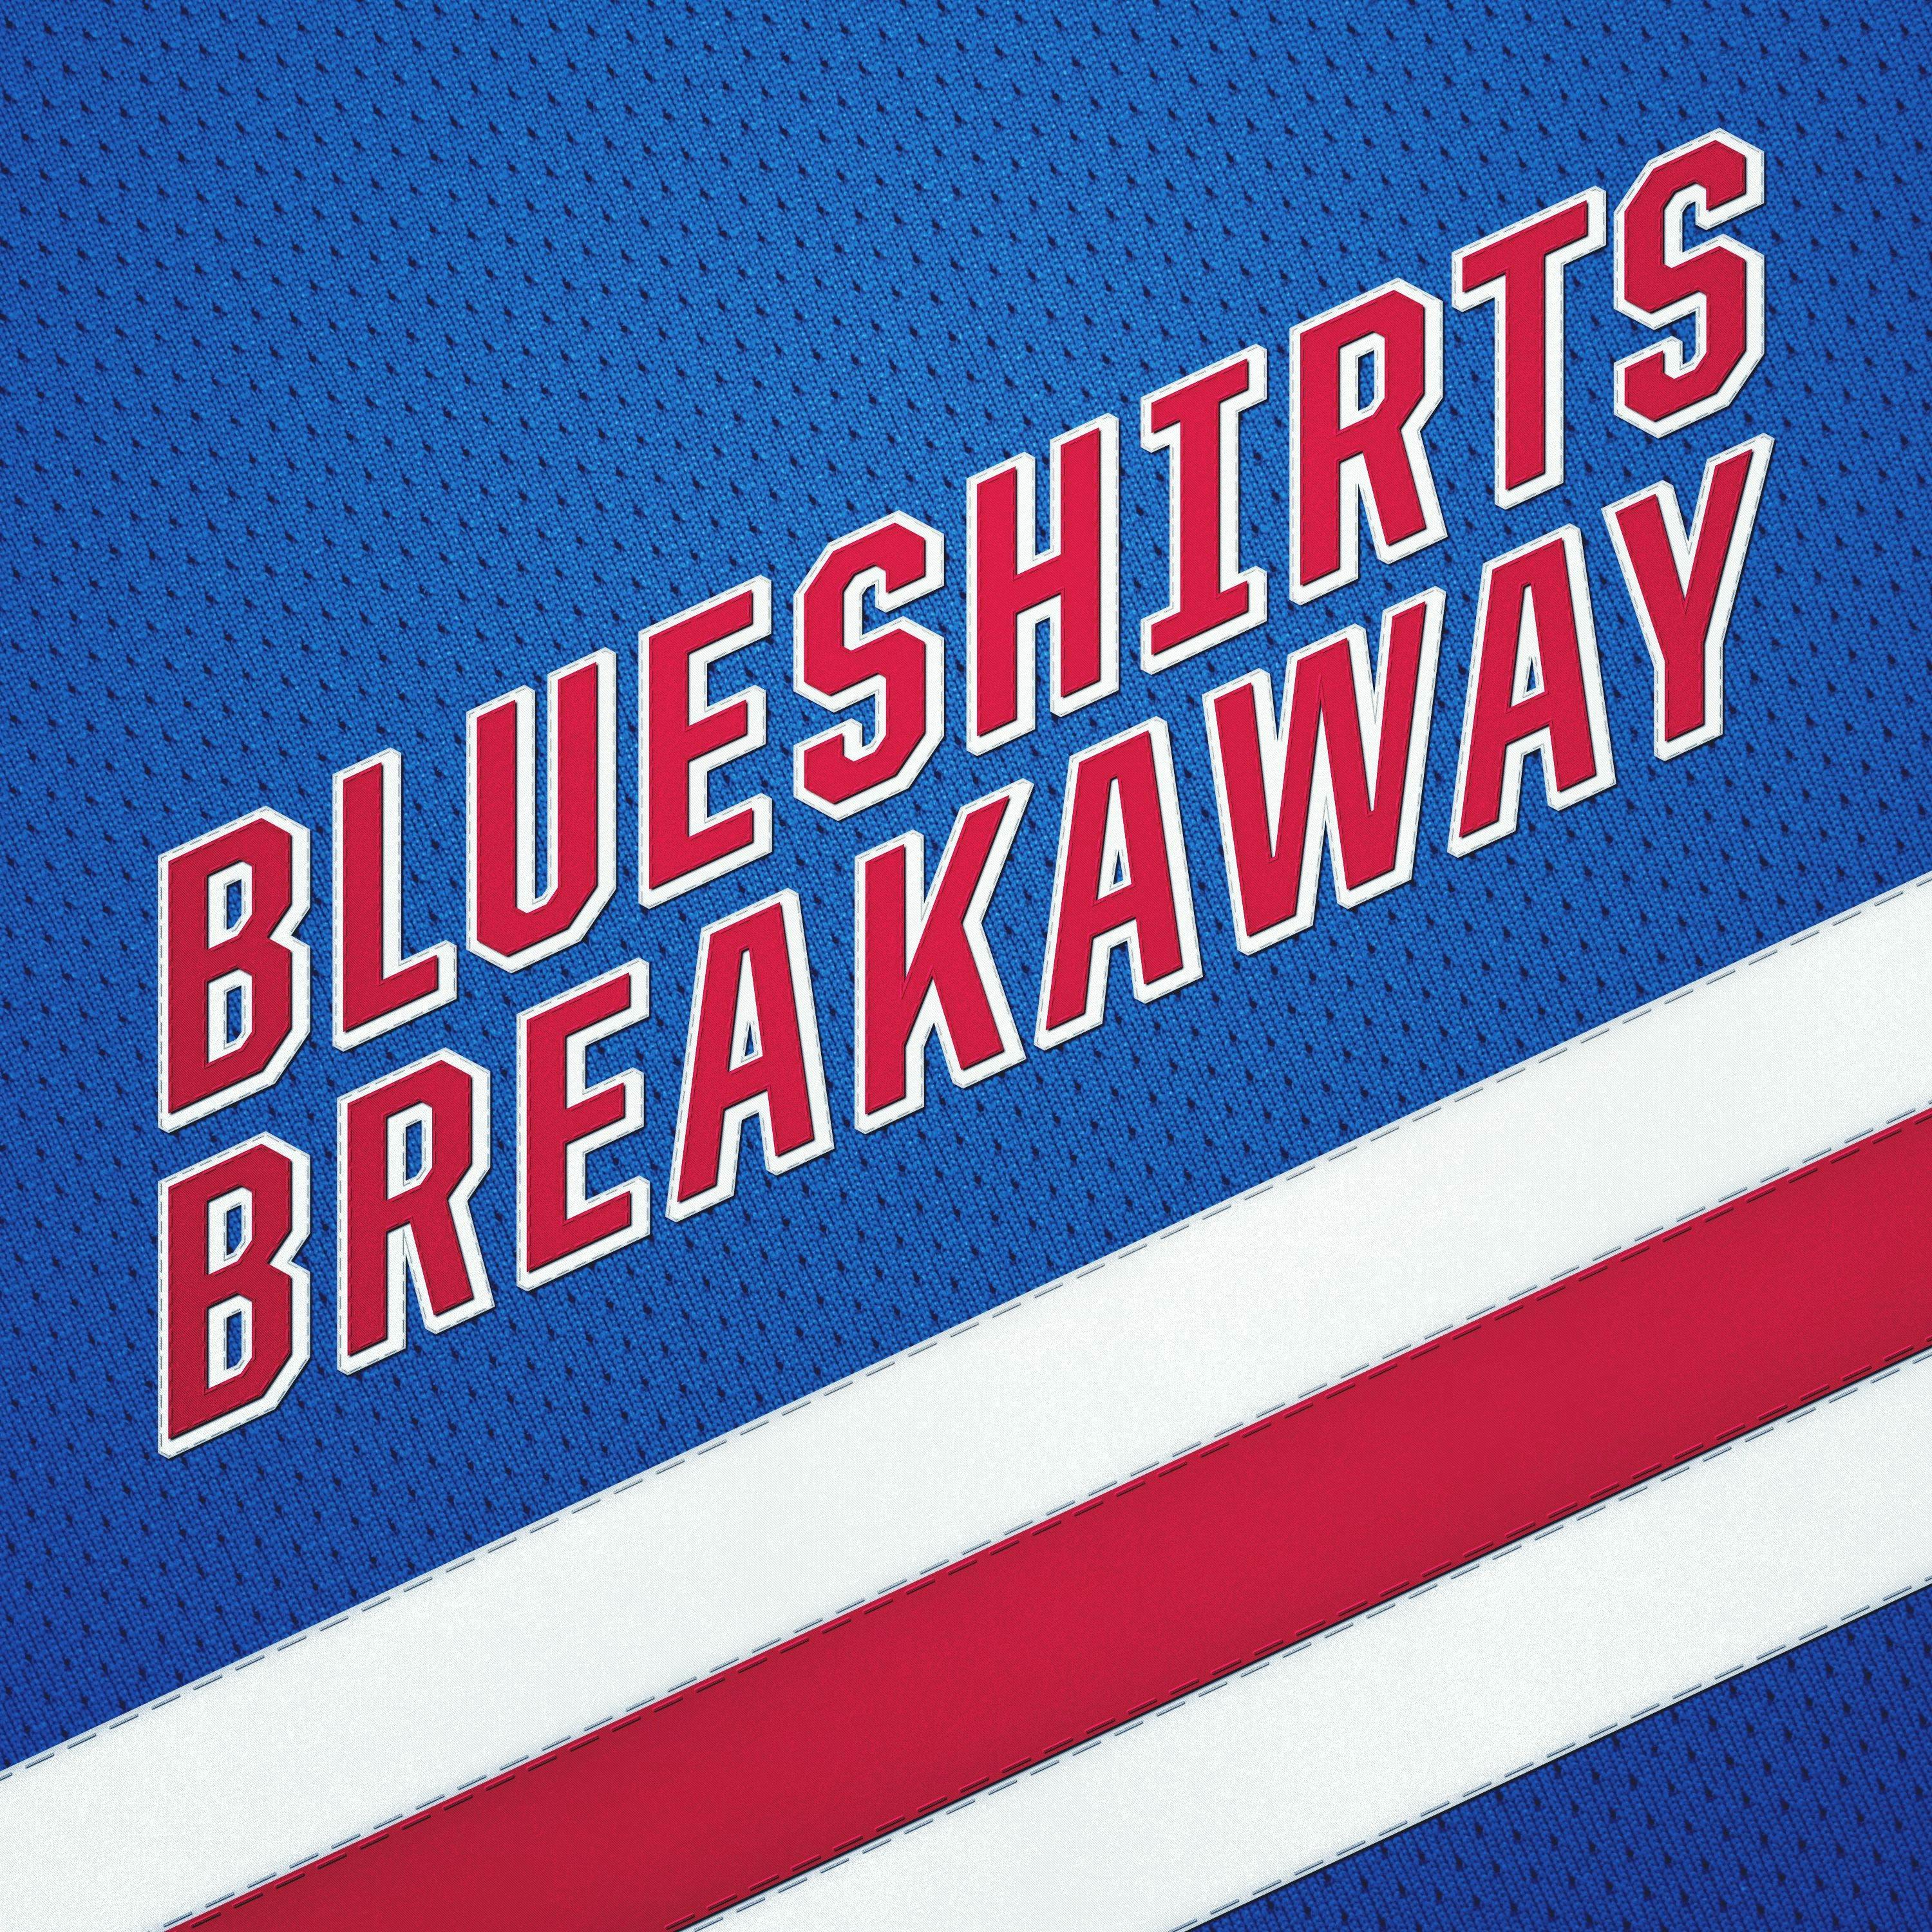 Blueshirts Breakaway Ep 74 - Reported Missing: The New York Rangers, Return to MSG If Found